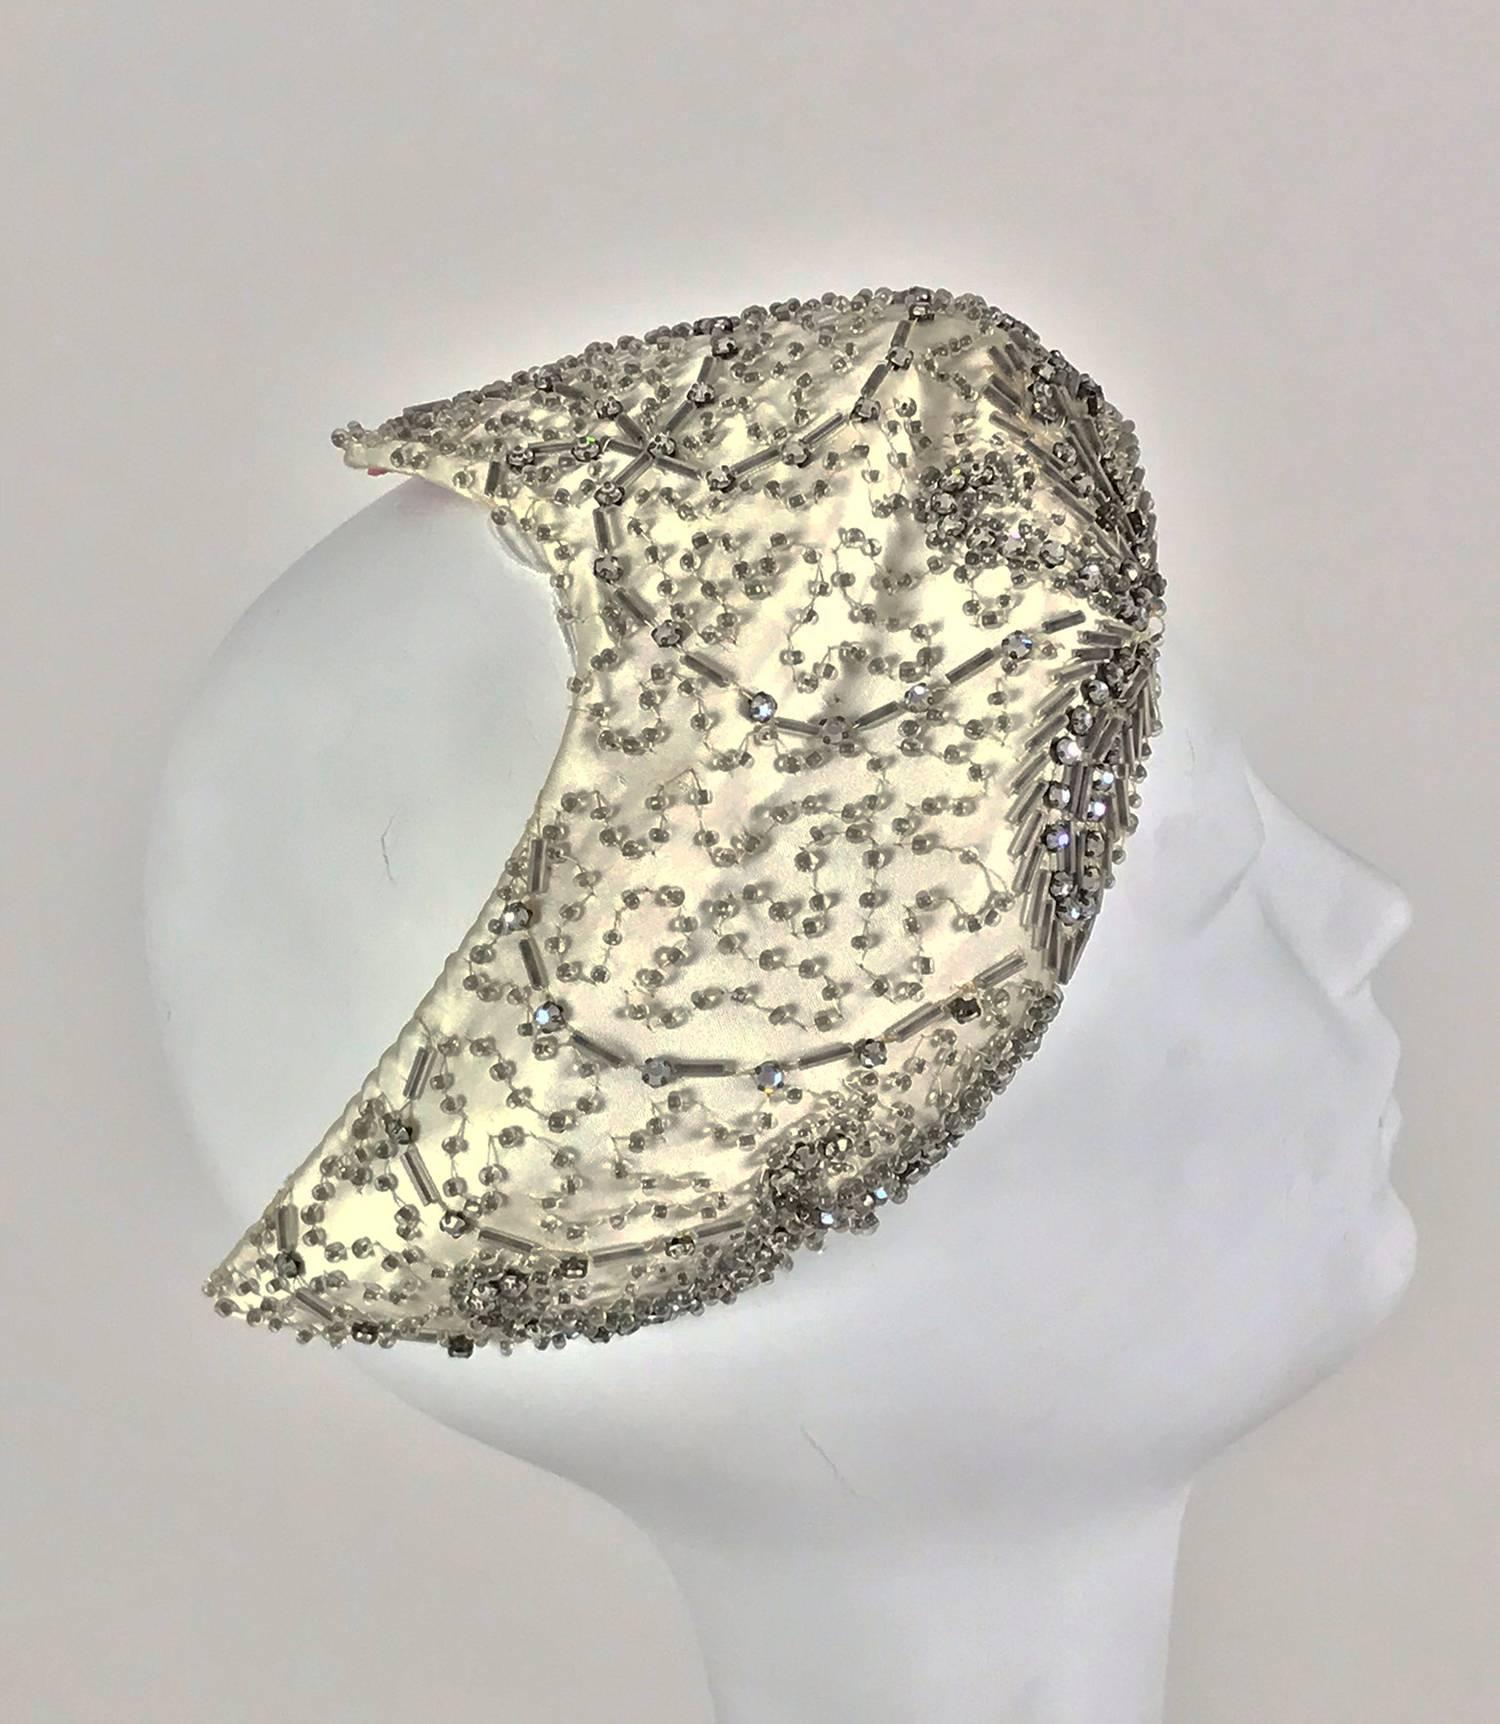 Designed by Lora rhinestone and beaded cocktail hat, 1950s 1